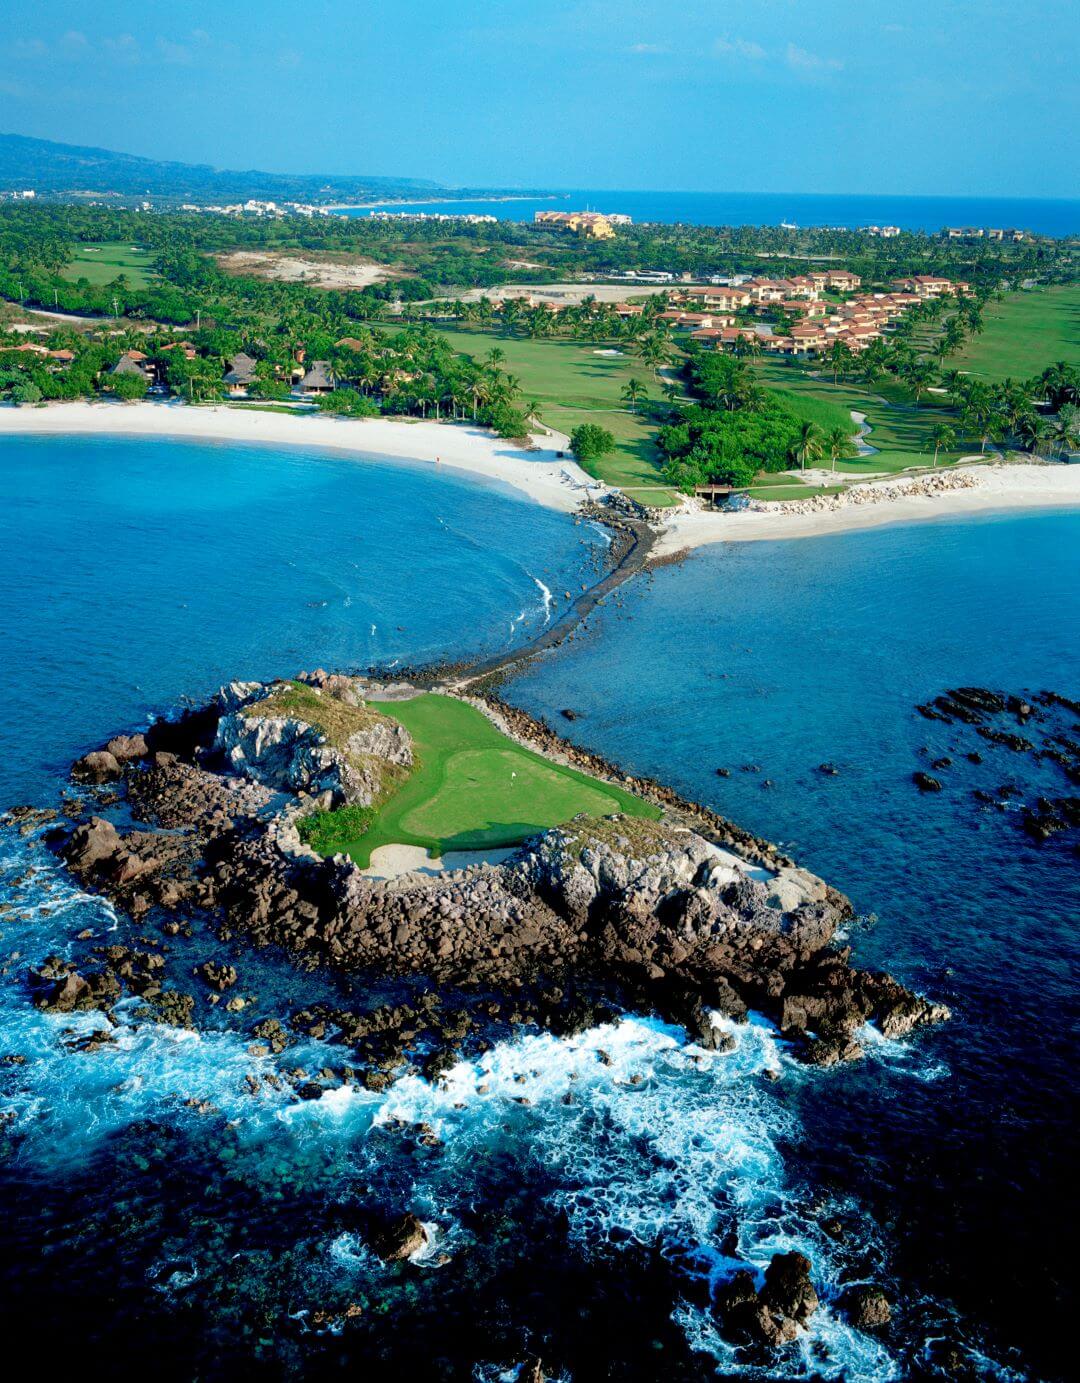 Ariel picture of Tail of a Whale Golf Hole at the st. regis punta mita